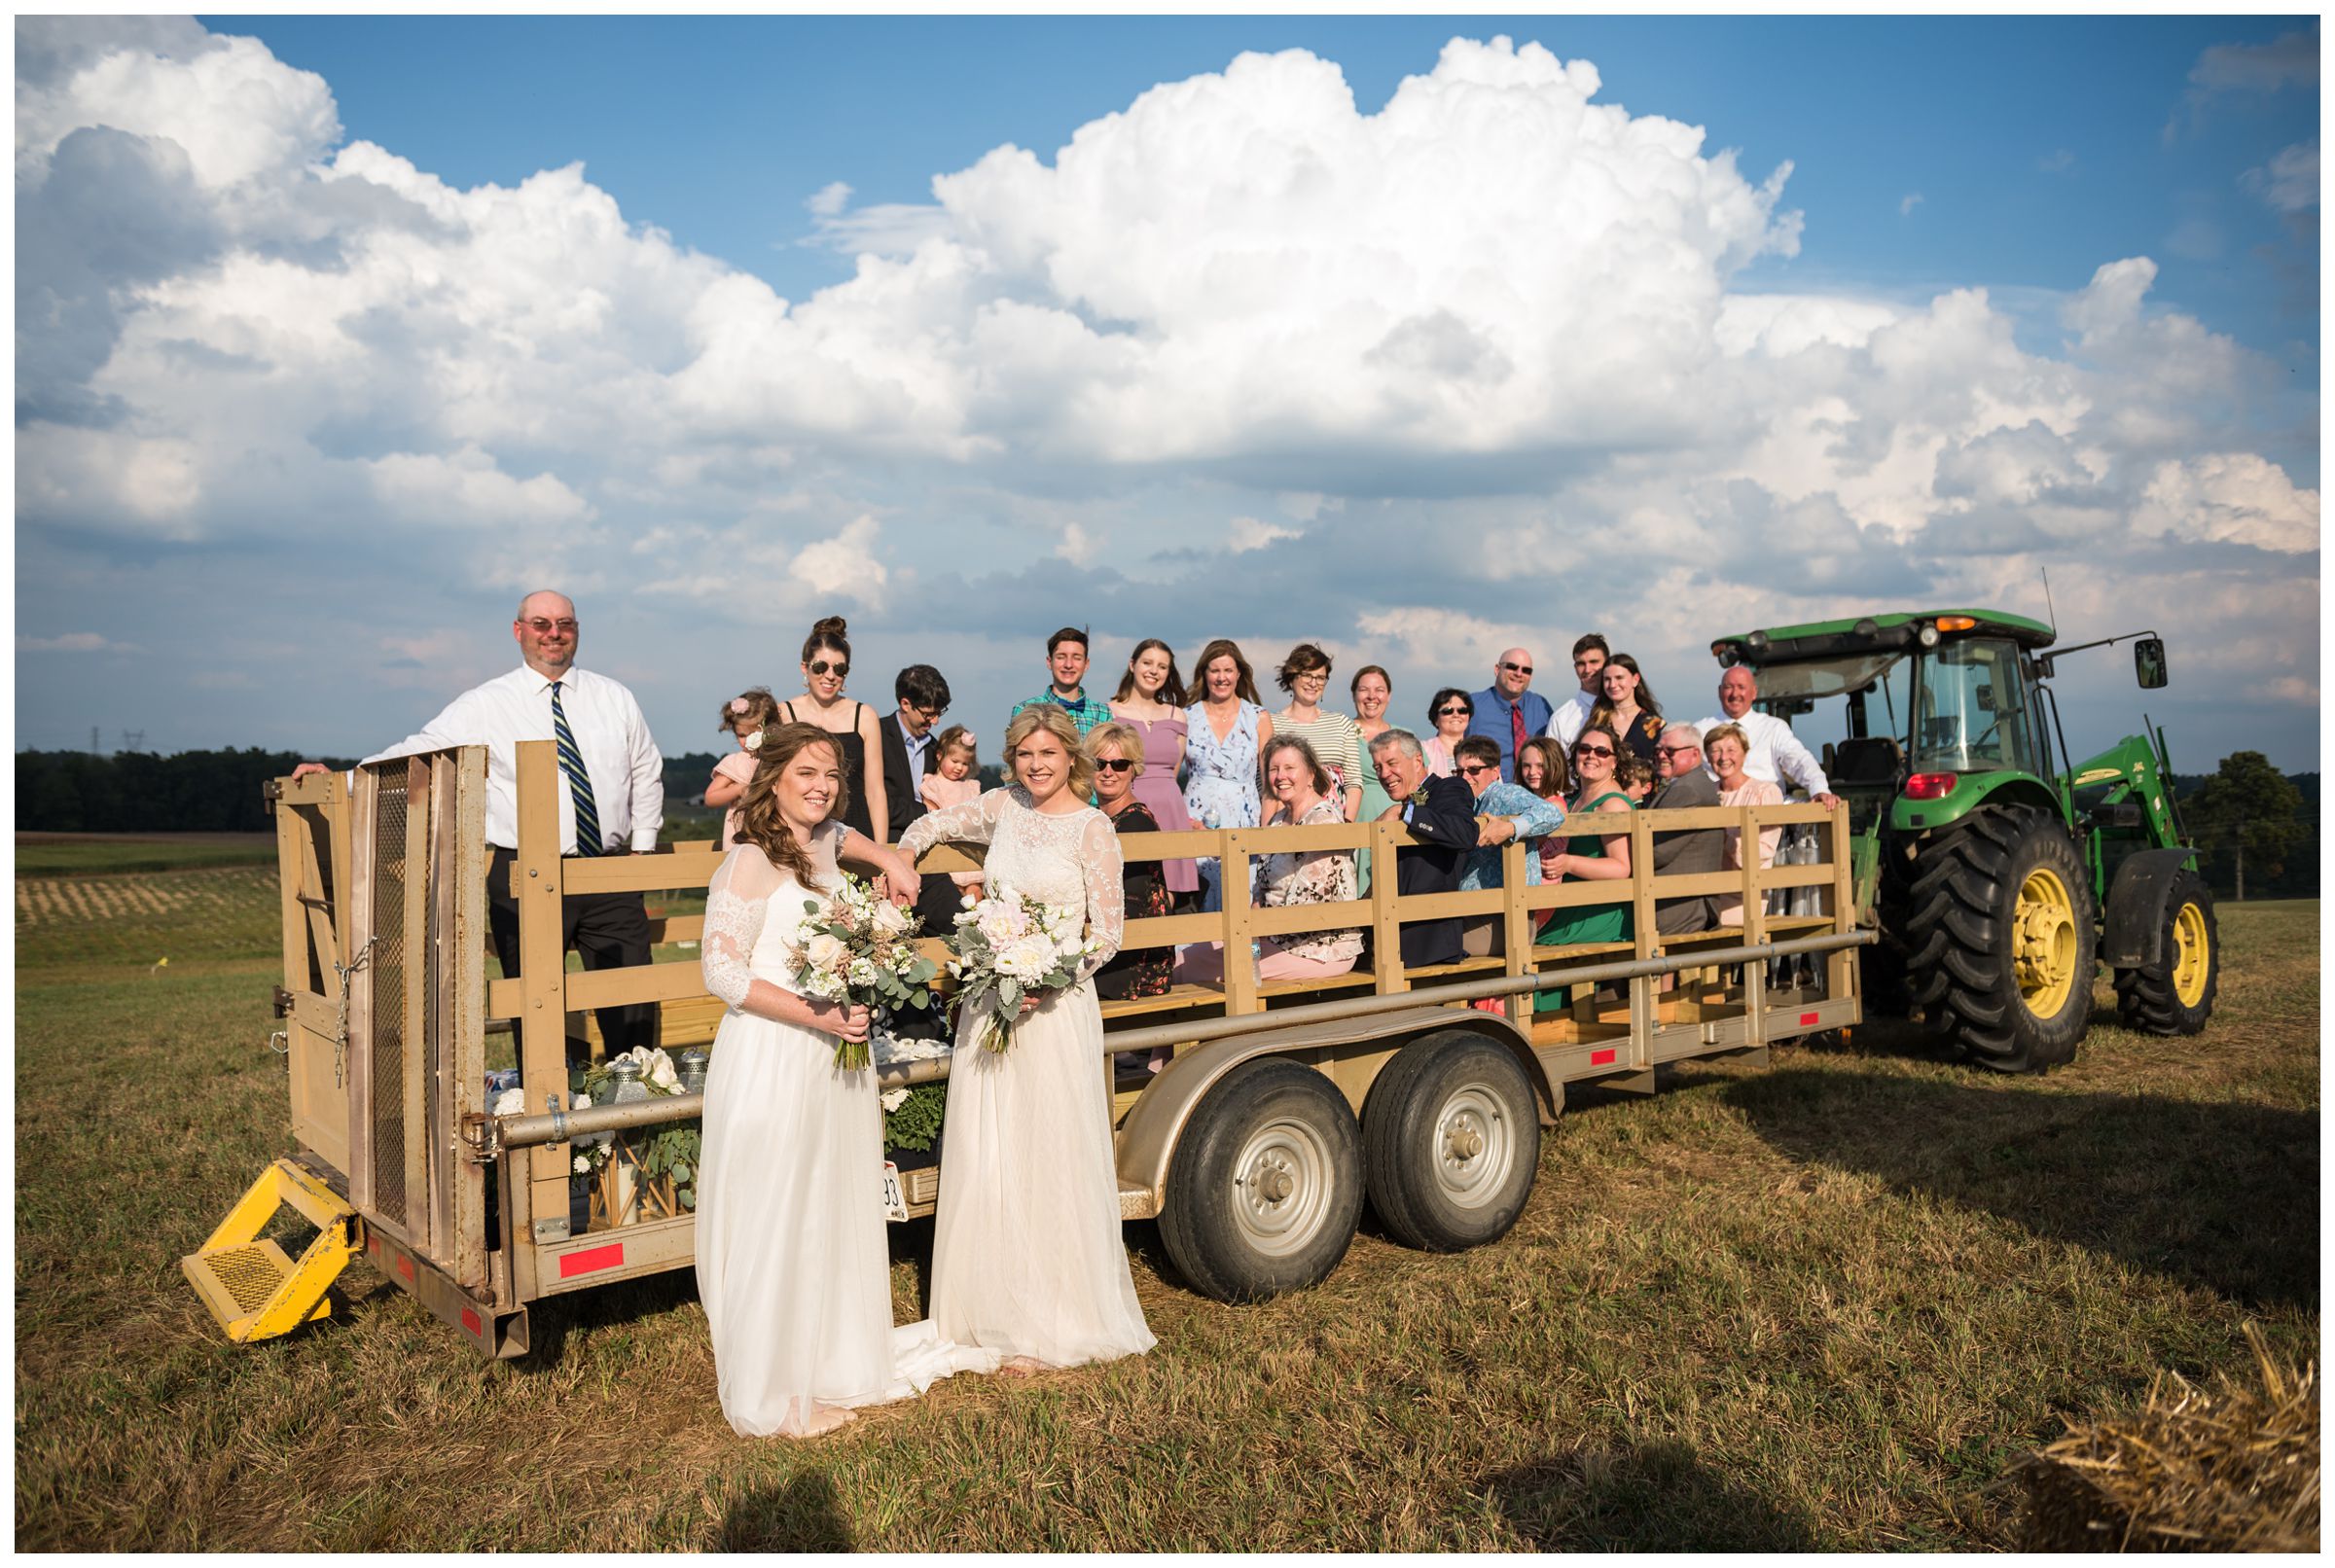 rustic tractor wagon for guest transportation during farm wedding